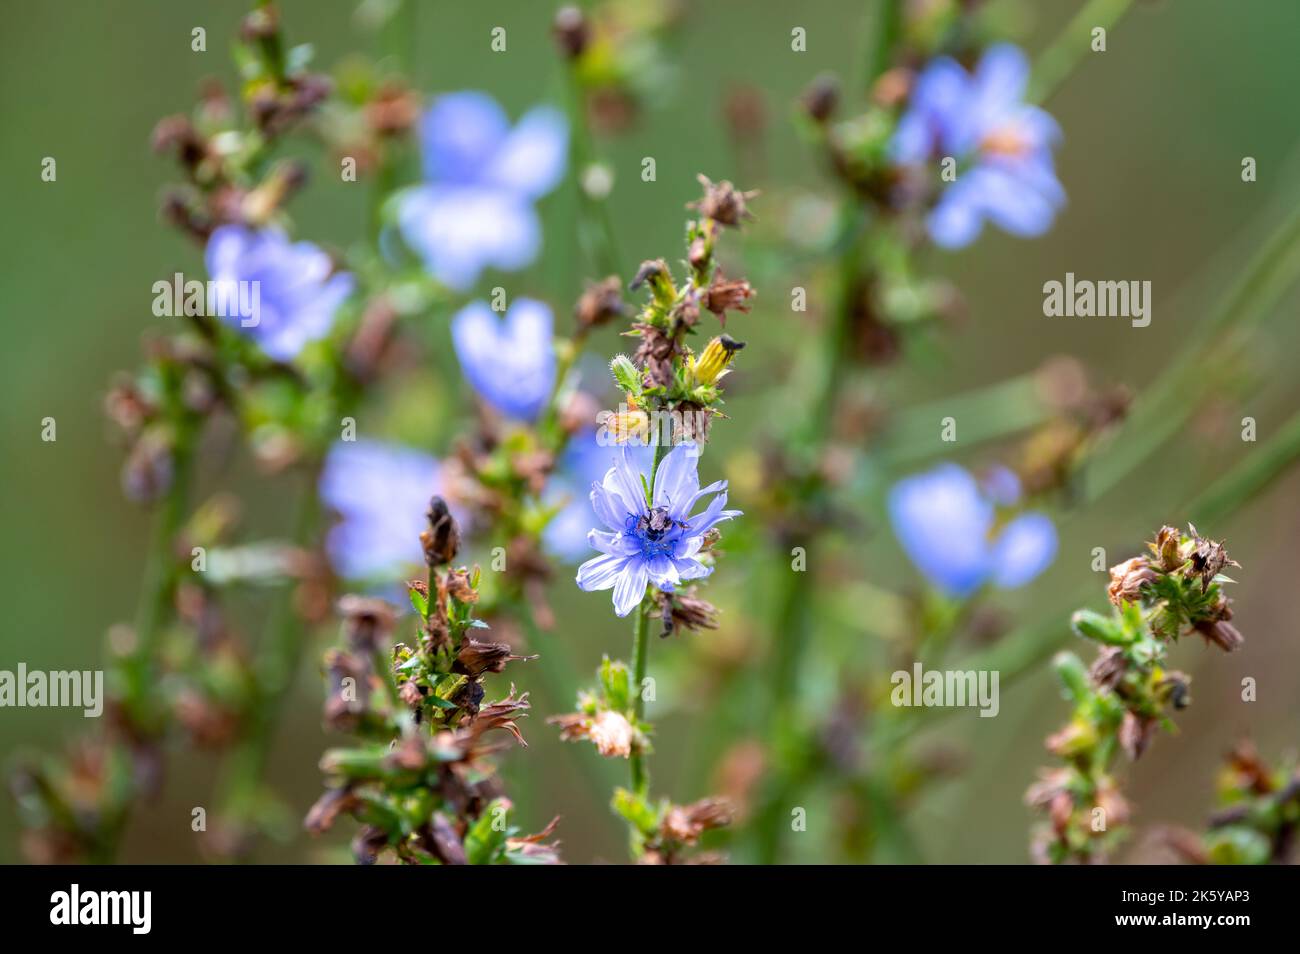 Blue flowers of cichorium plants, family Asteraceae, growing in garden Stock Photo